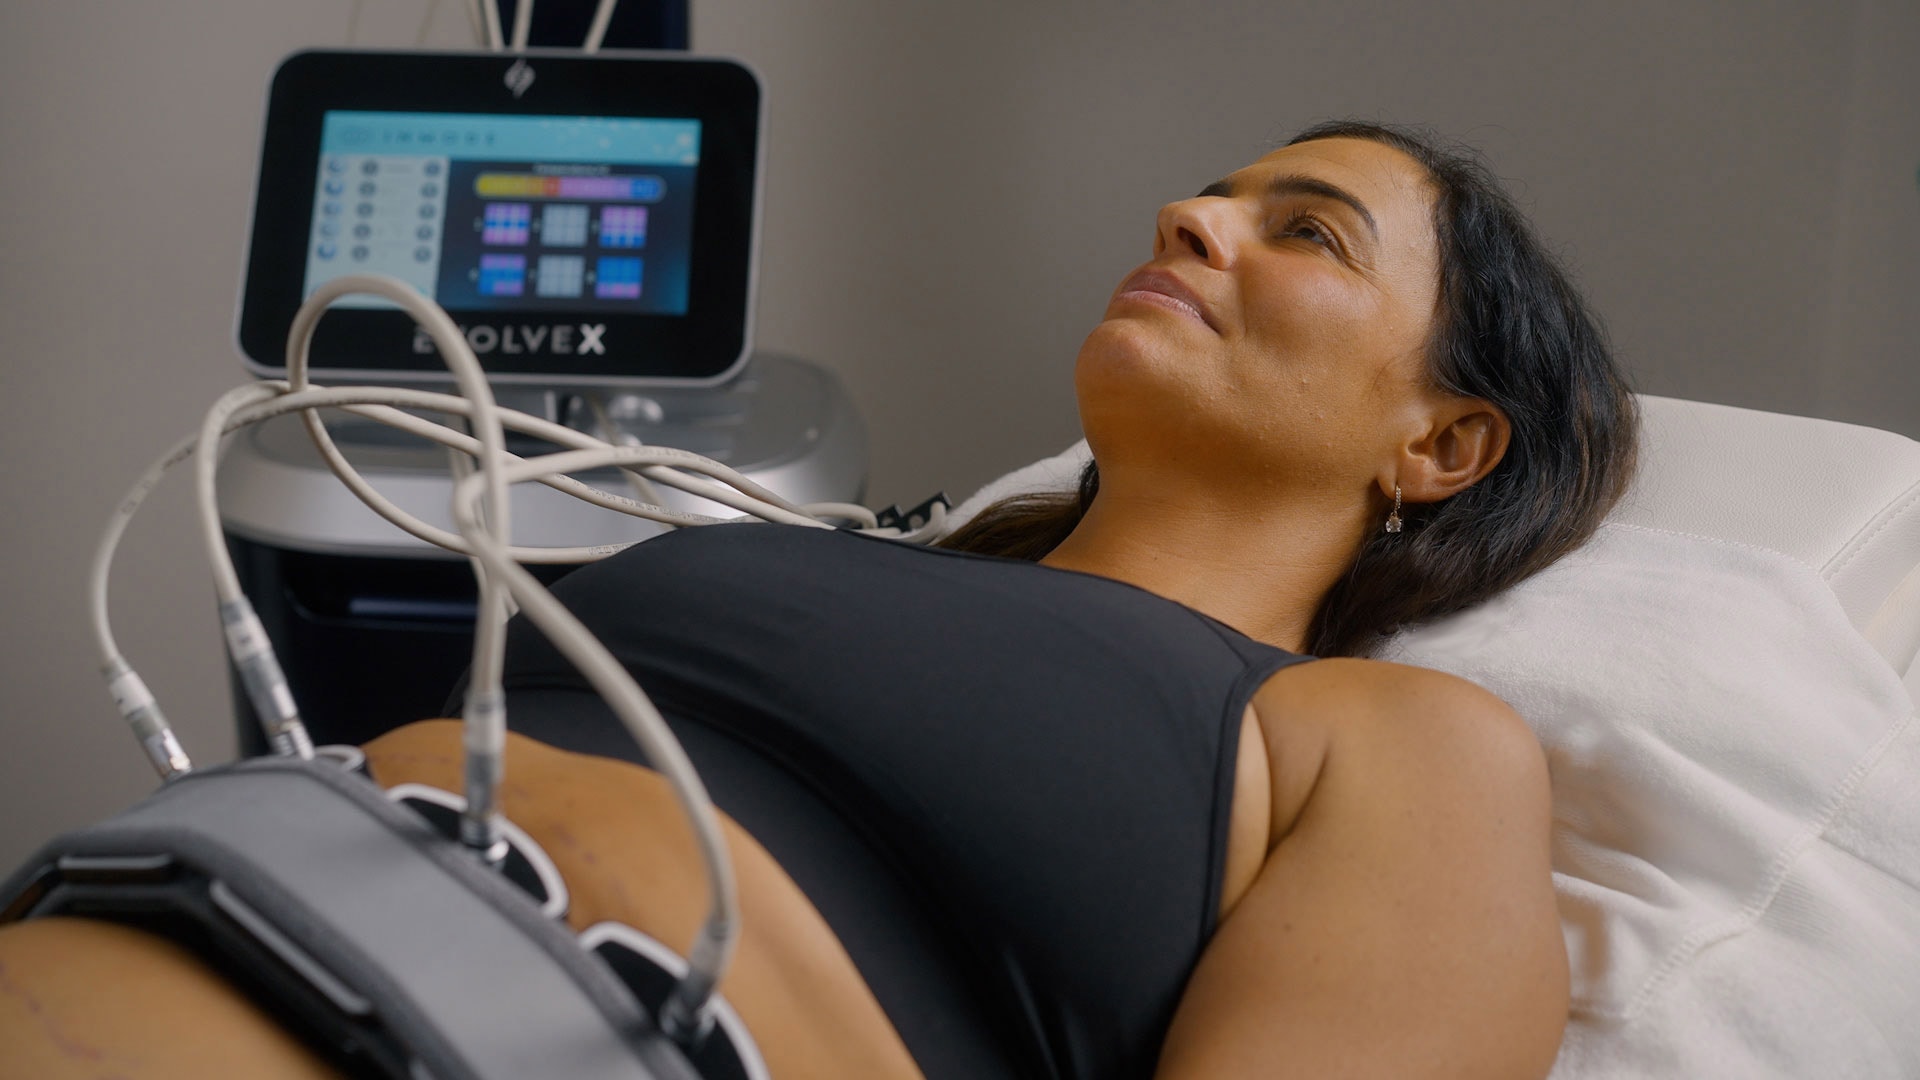 The Evolve X platform, including Tite, Transform and Tone, is used to help repair a woman’s Diastasis Recti after childbirth